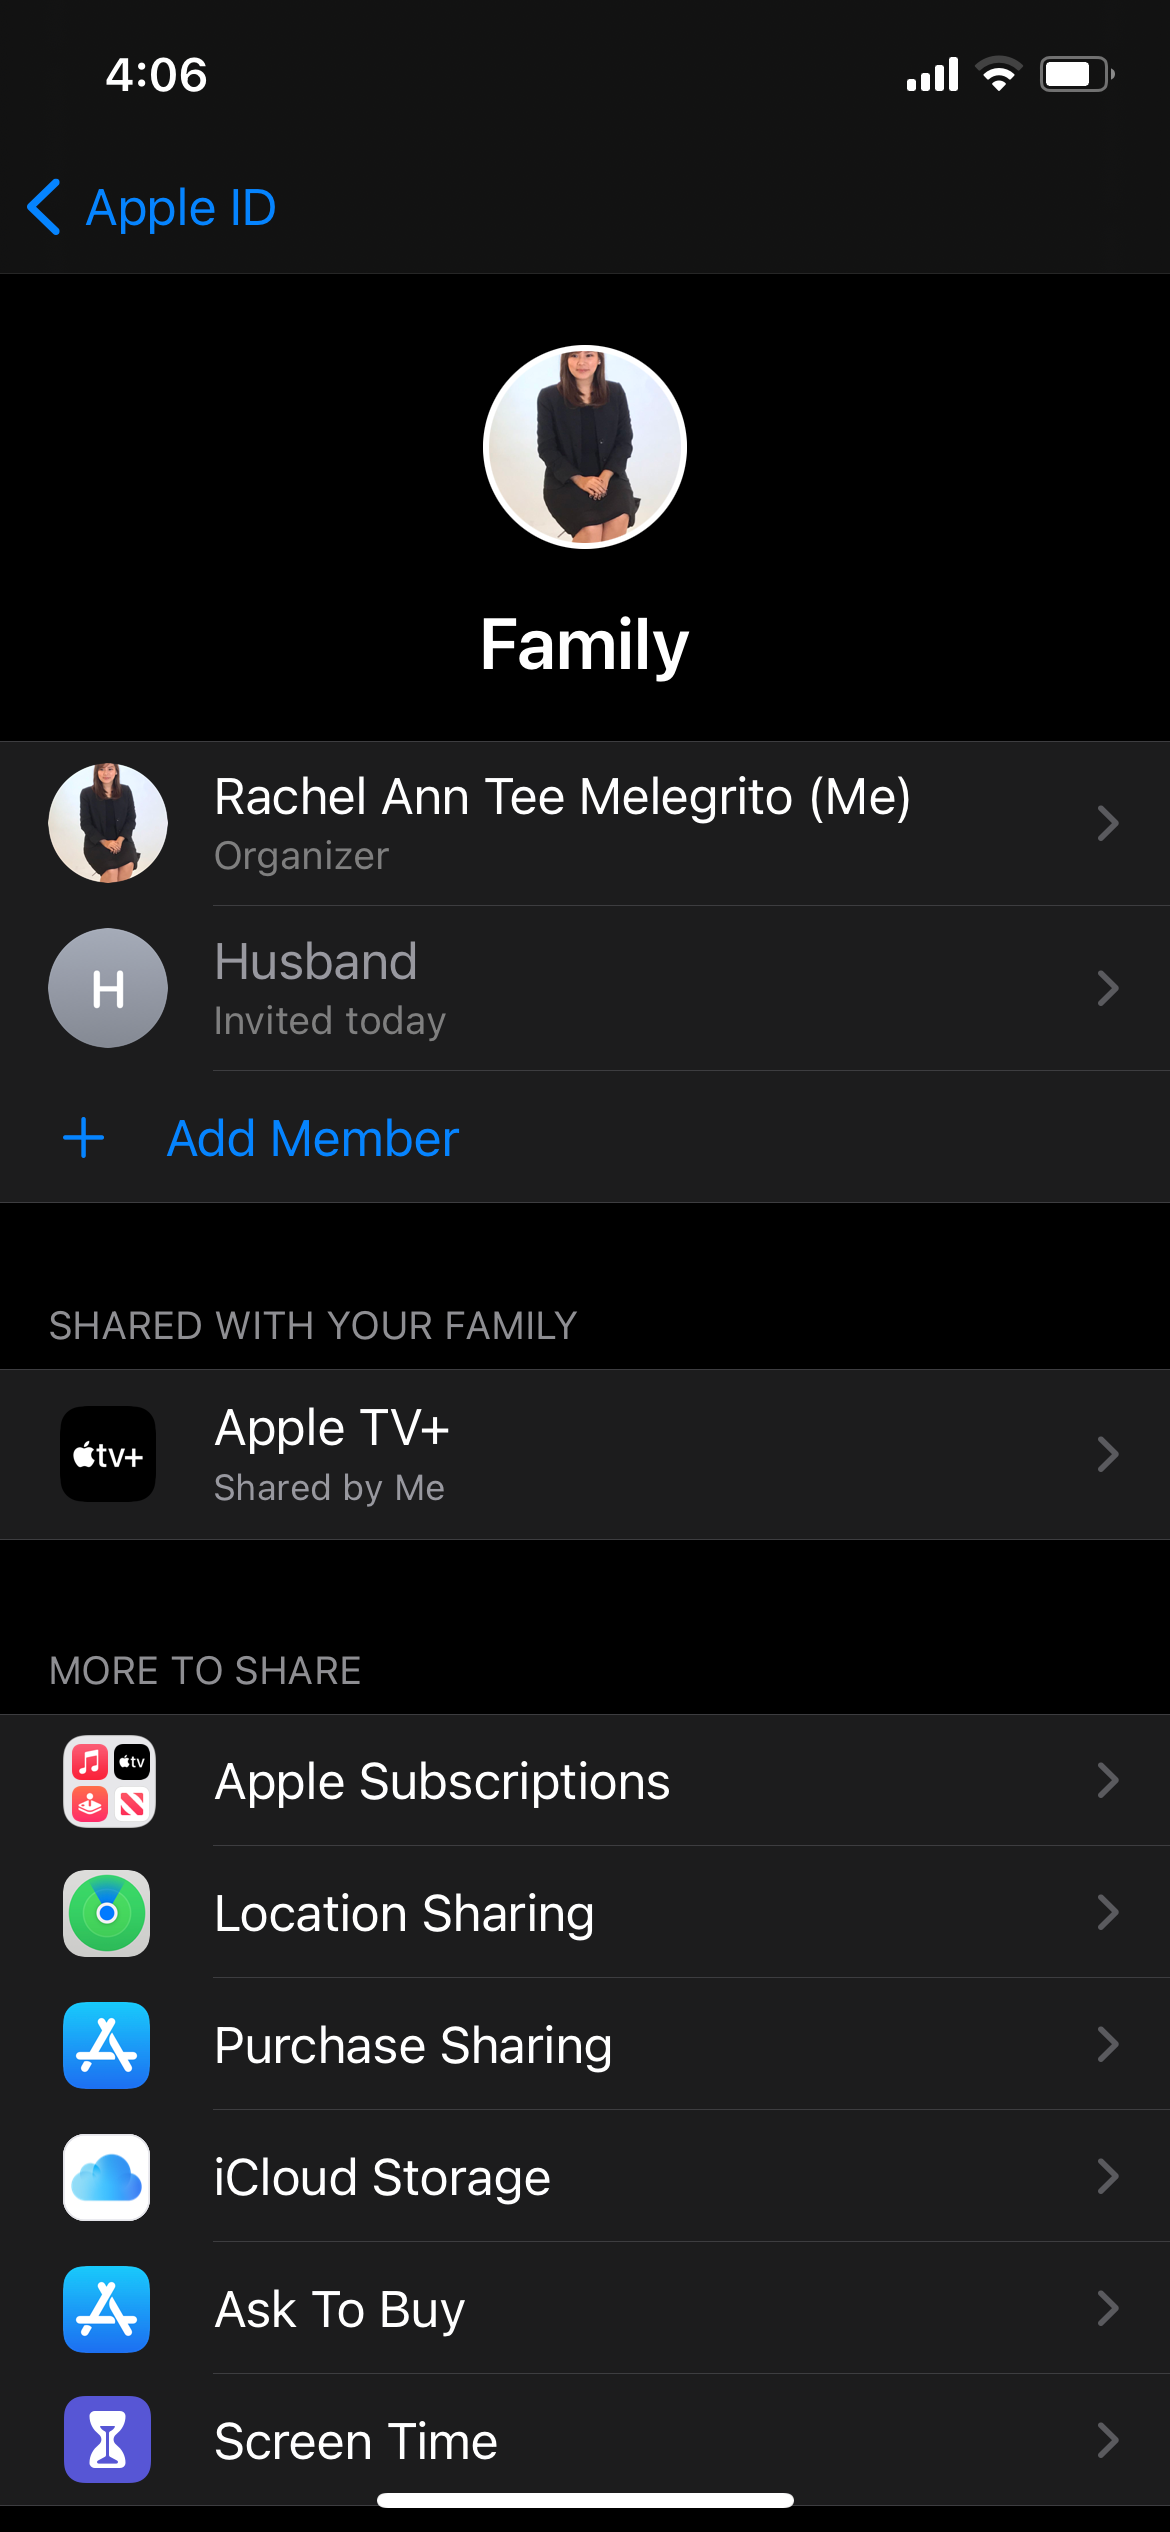 Family Members Appearing Under User's Apple ID for Family Sharing